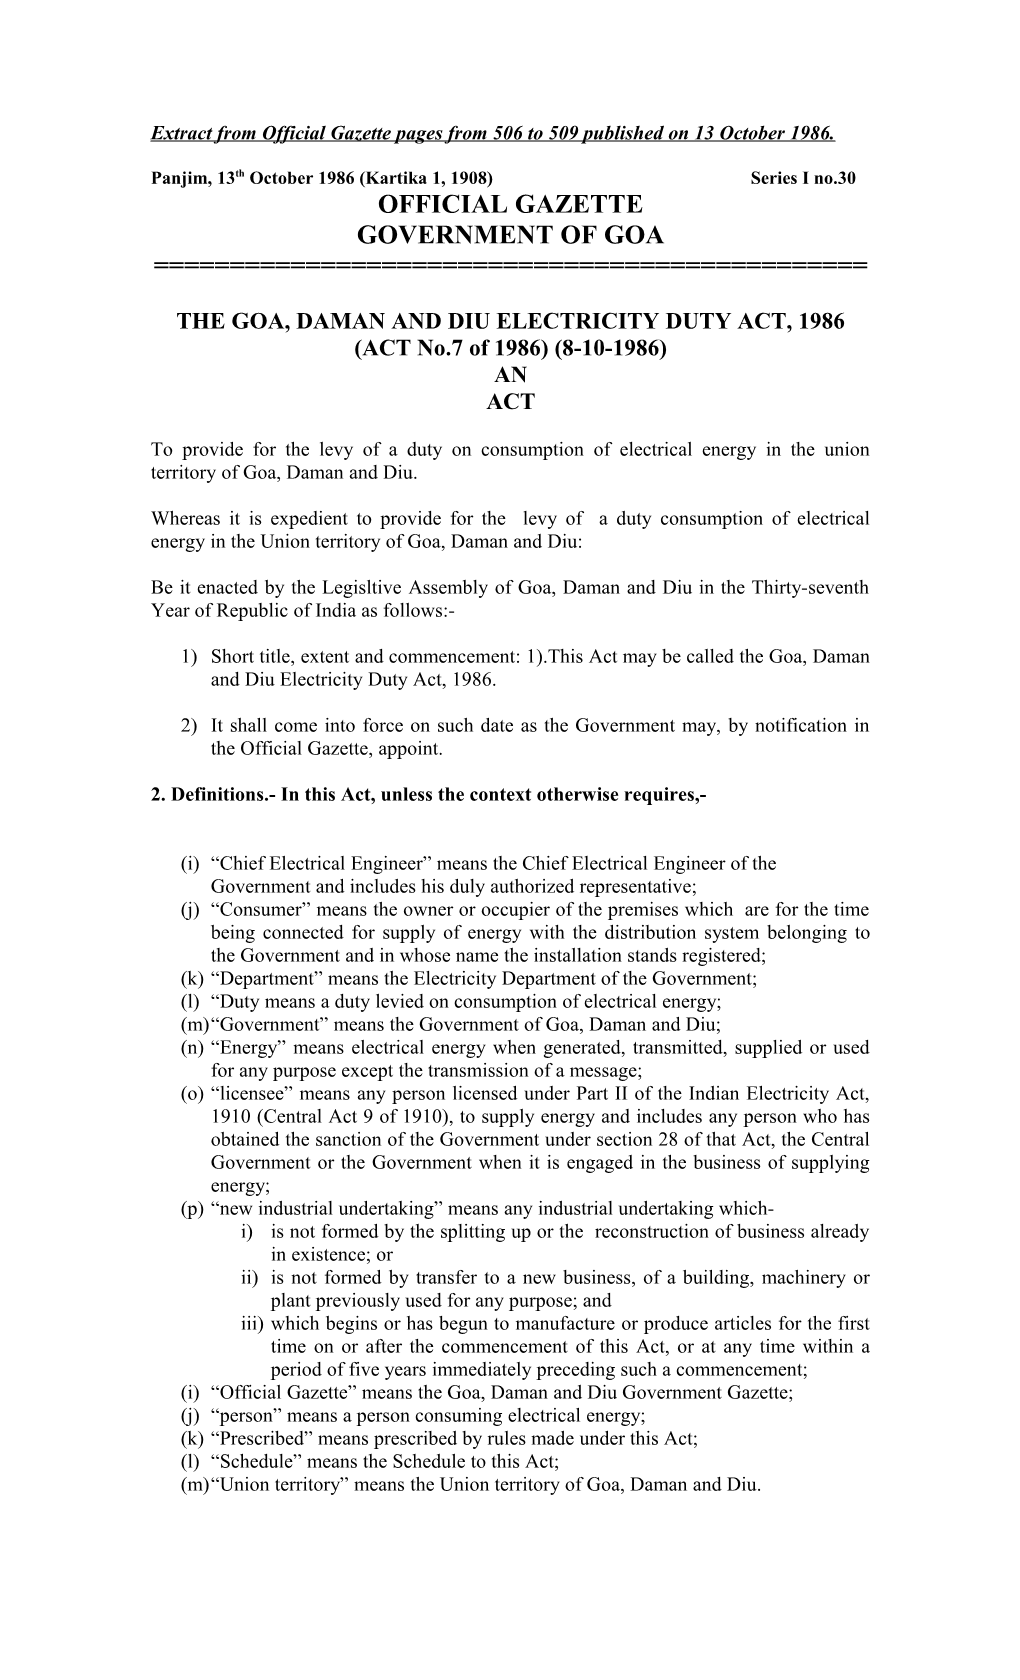 The Goa, Daman and Diu Electricity Duty Act, 1986